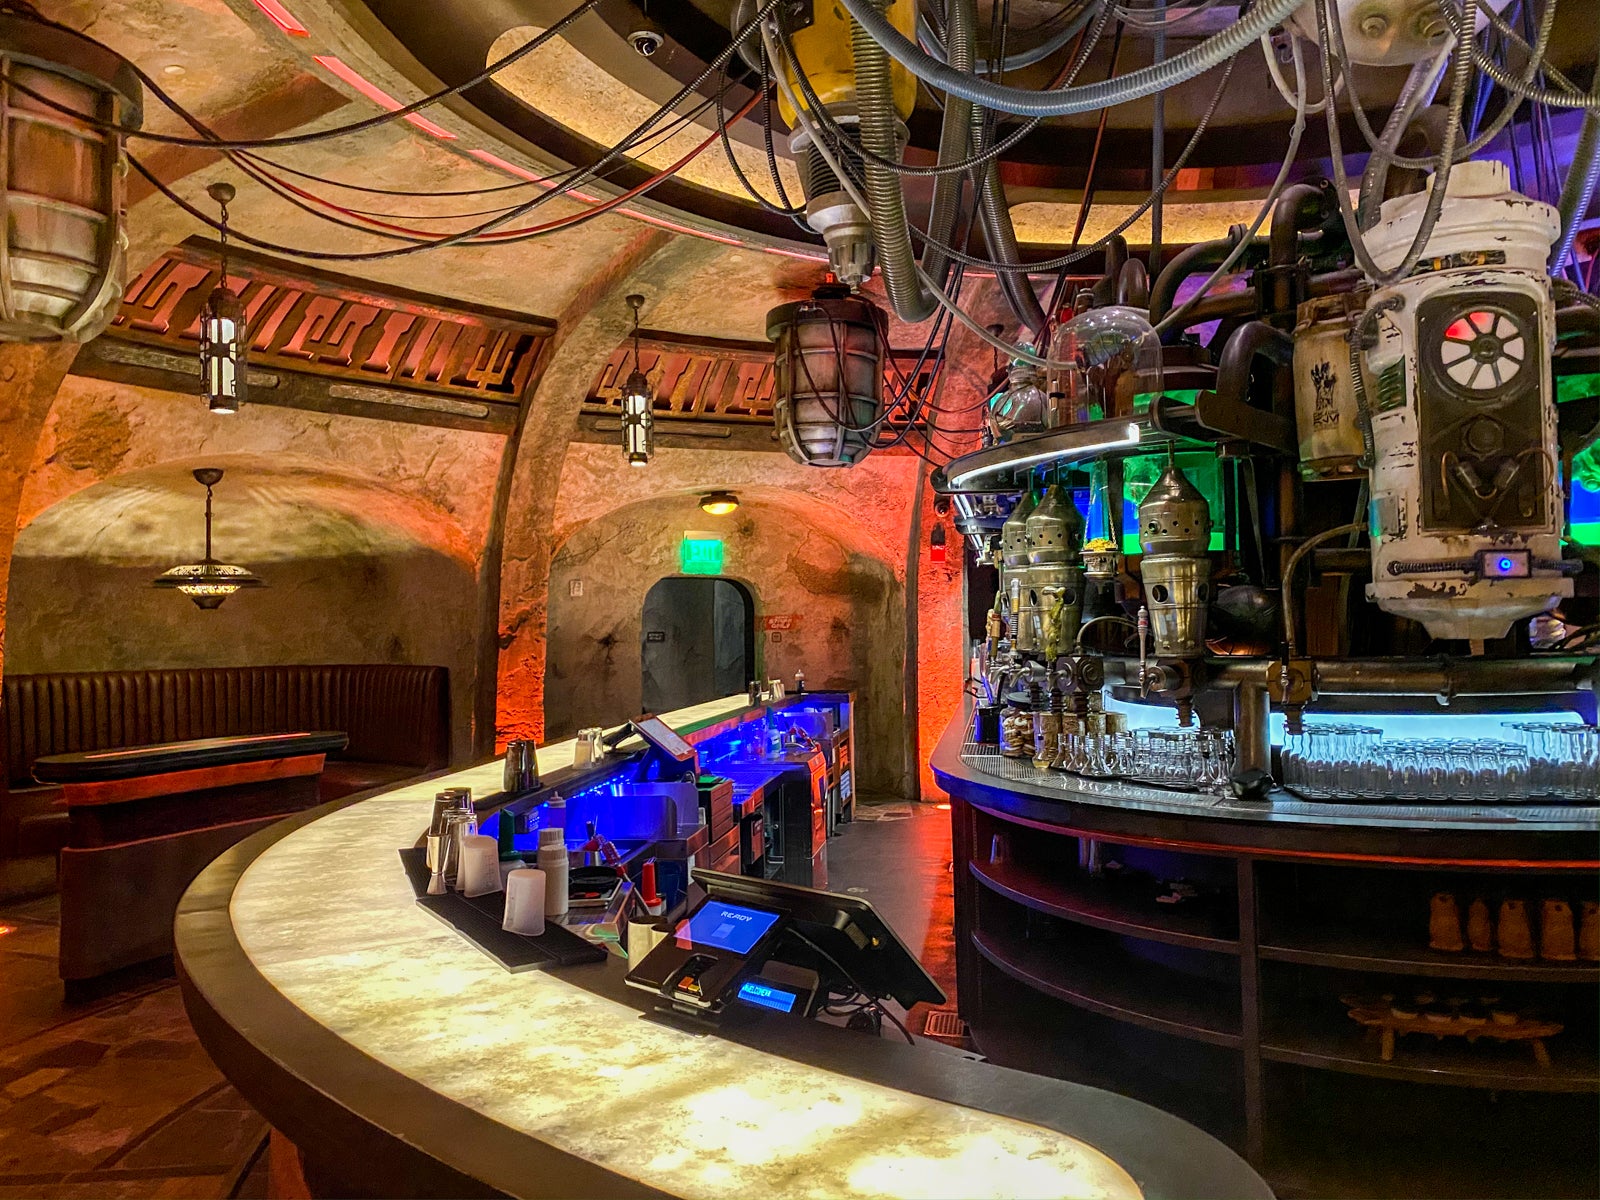 a view of the empty bar inside Oga's Cantina at Star Wars: Galaxy's Edge in Disney World